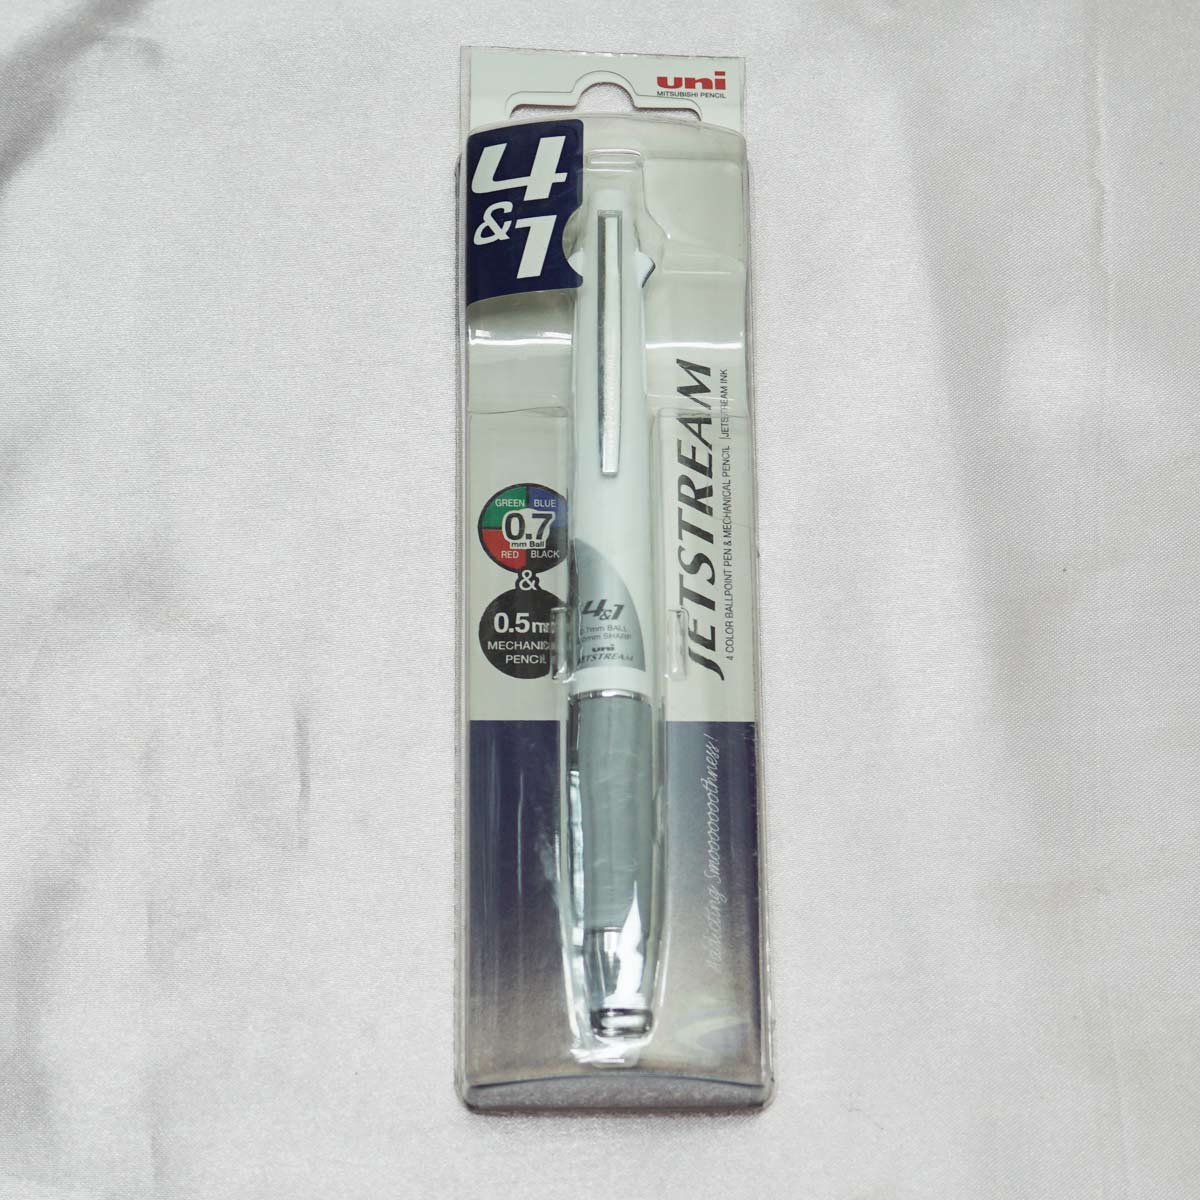 Uniball MSXE5-1000-07 Jetstream White Color Body With 4 Color 0.7mm Ballpoint Pen and 0.5mm Mechanical Pencil SKU 22472